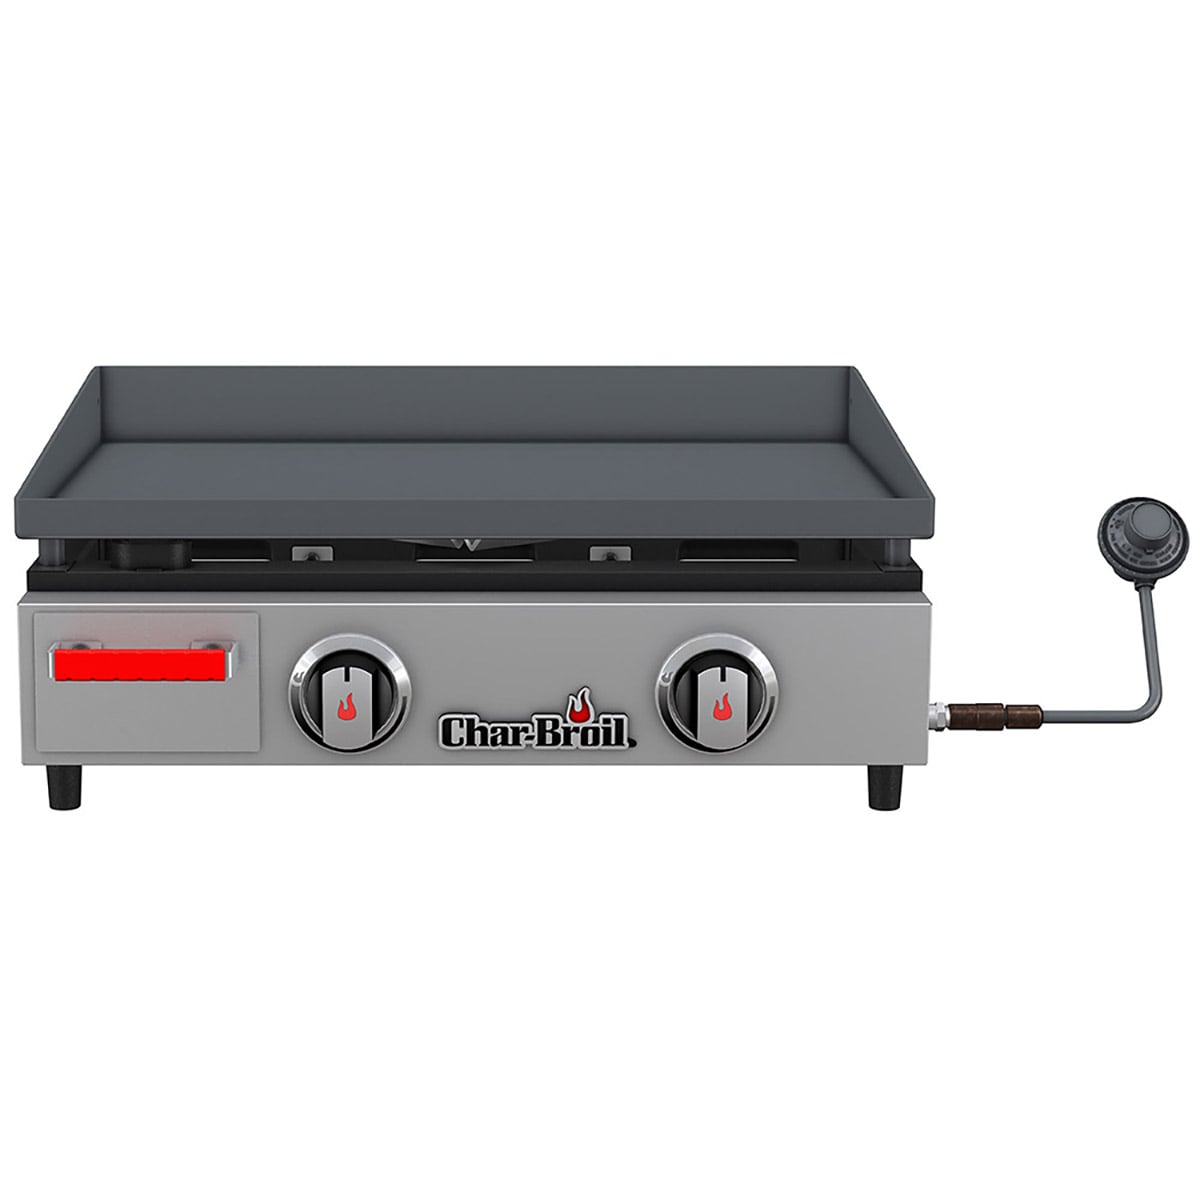 Stove Top Flat Griddle 2 Burner Griddle Grill Pan for Glass Stove Top Grill